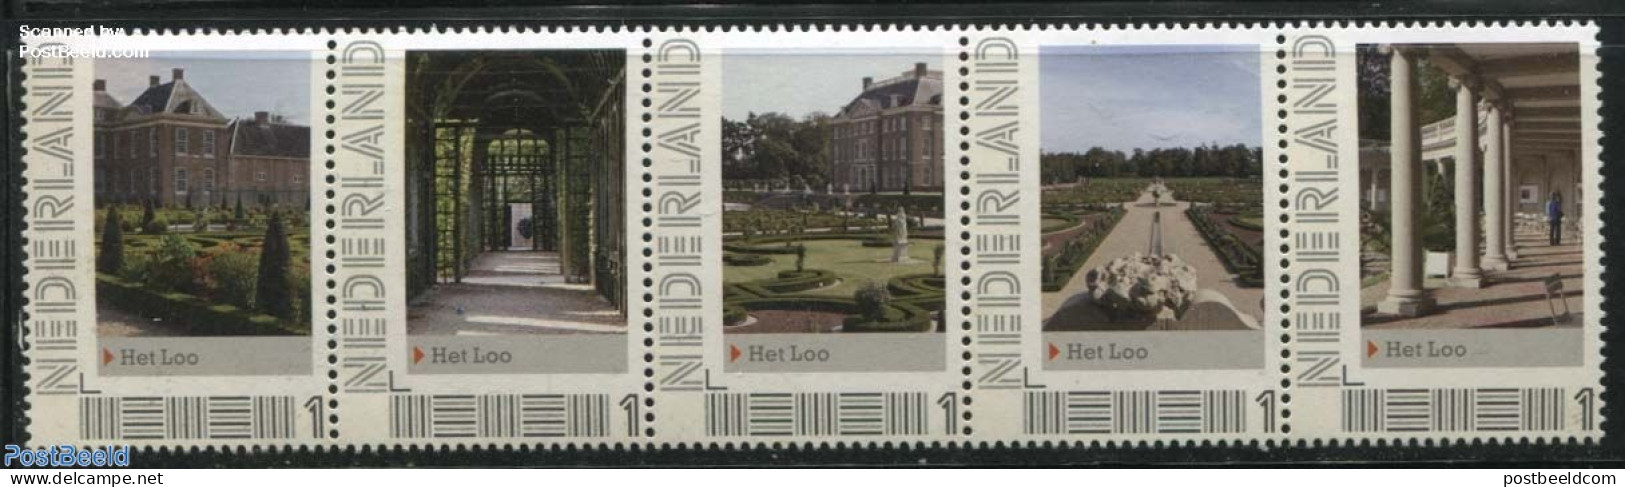 Netherlands - Personal Stamps TNT/PNL 2012 Het Loo 5V [::::], Mint NH, Nature - Trees & Forests - Art - Castles & Fort.. - Rotary Club